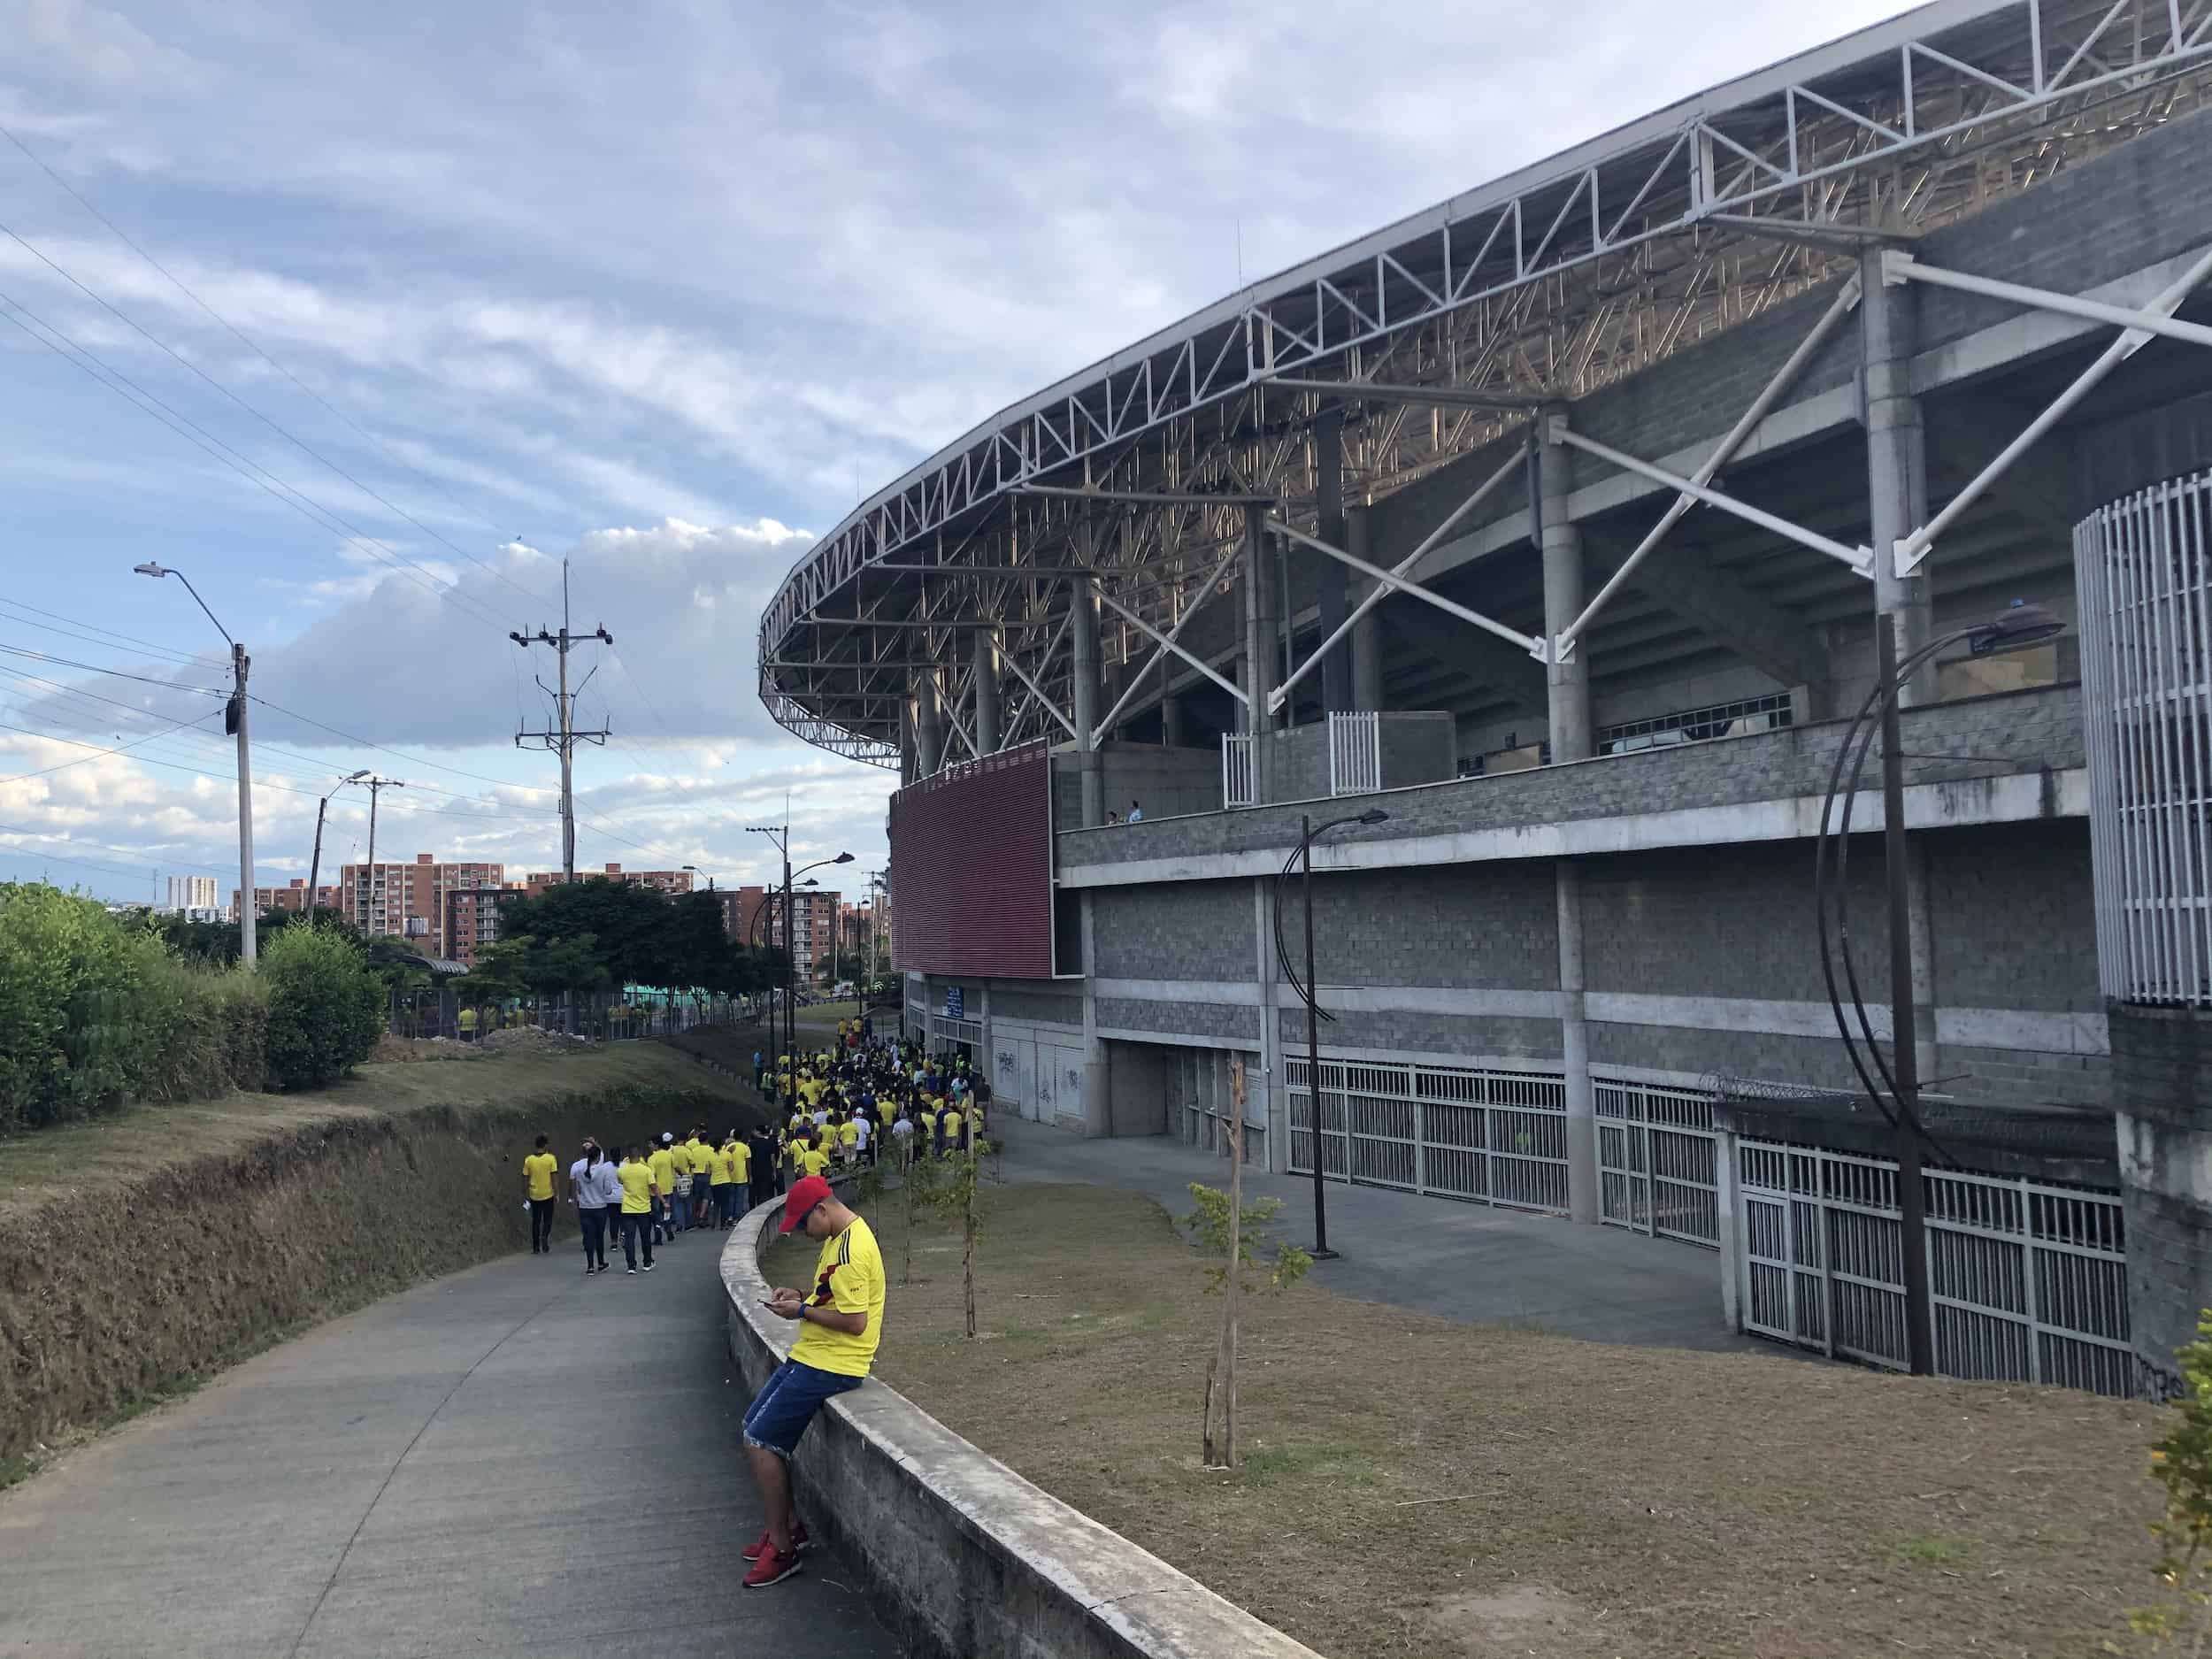 Heading to the gates for the 2020 CONMEBOL Pre-Olympic Tournament in Pereira, Colombia